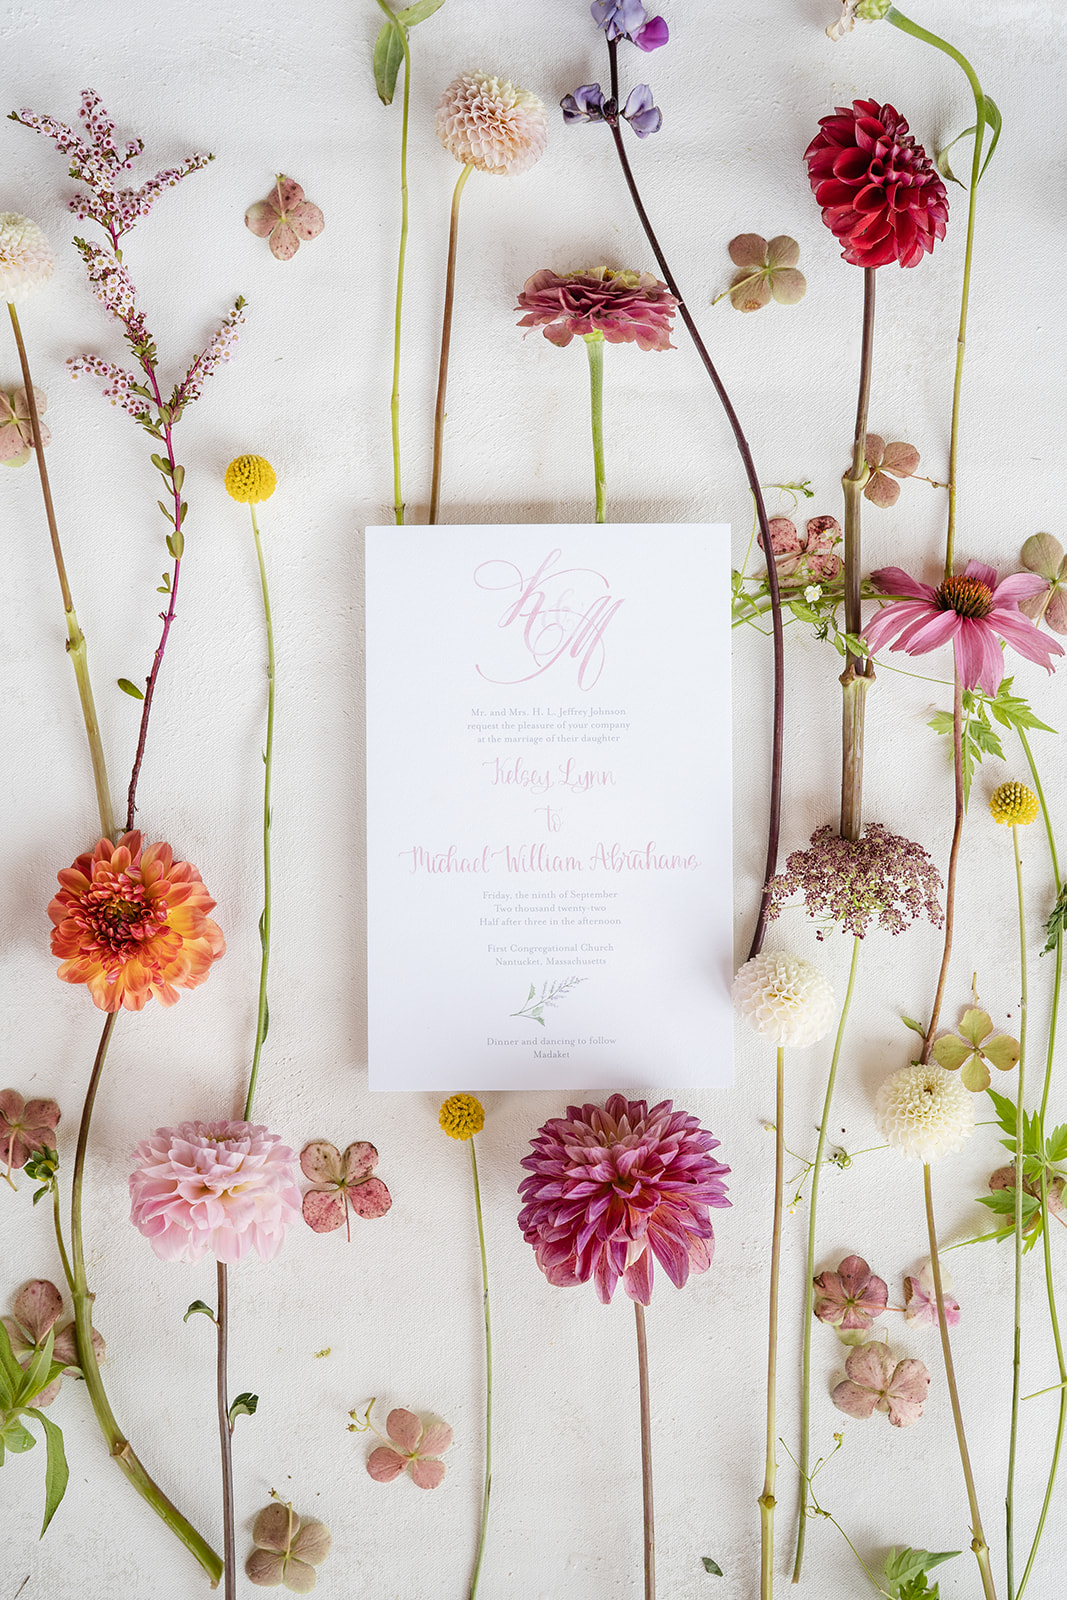 Wedding invitation on white paper with pink font flat layed on flowers with long, delicate stems nantucket wedding